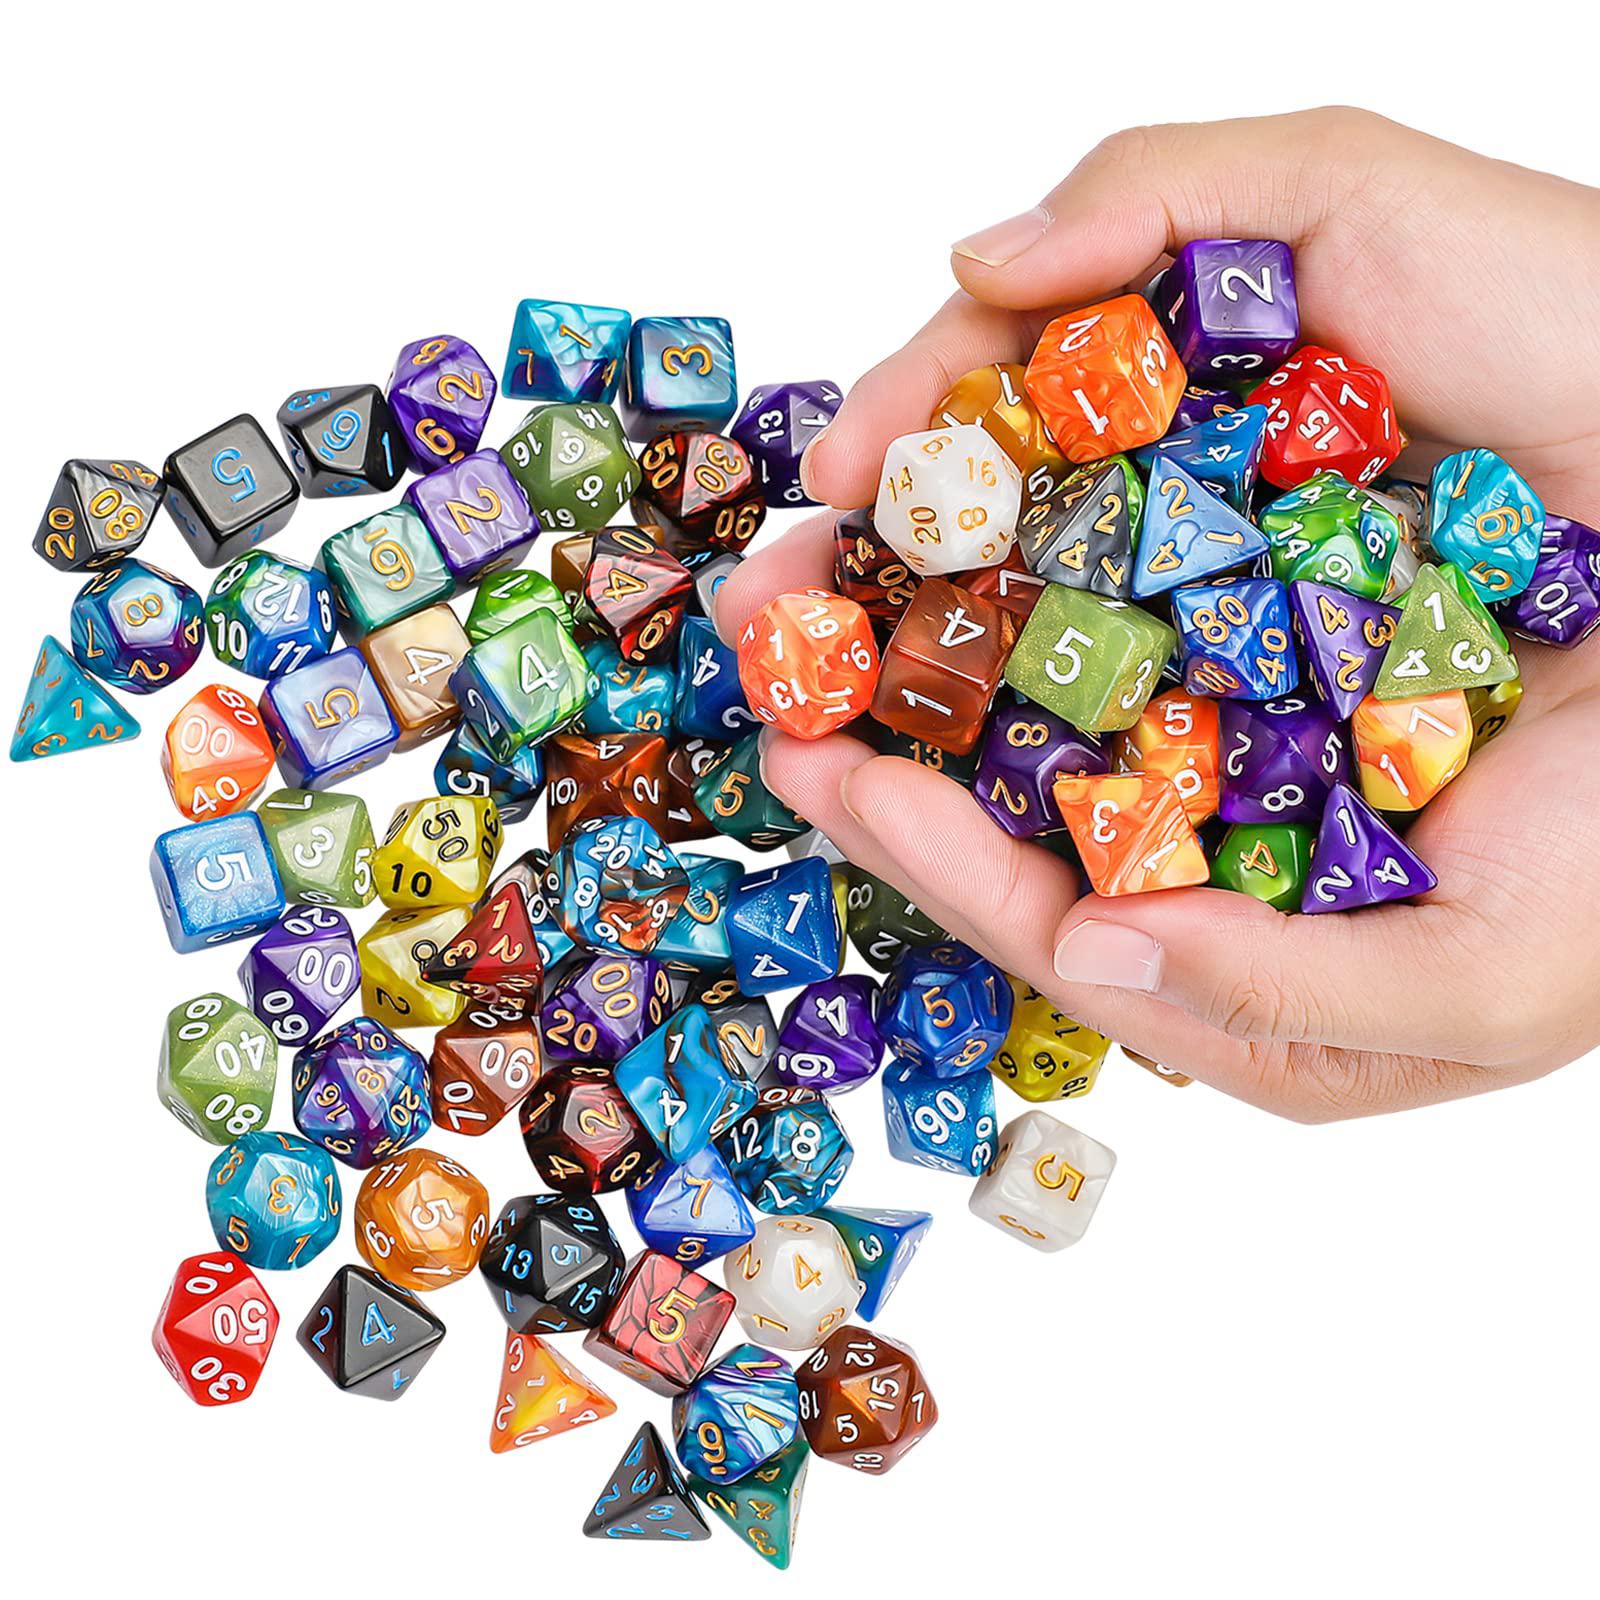 qmay dnd dice set - 20x7 (140 pieces) polyhedral dice, 20 colors d&d dice for dungeons and dragons tabletop role-playing game